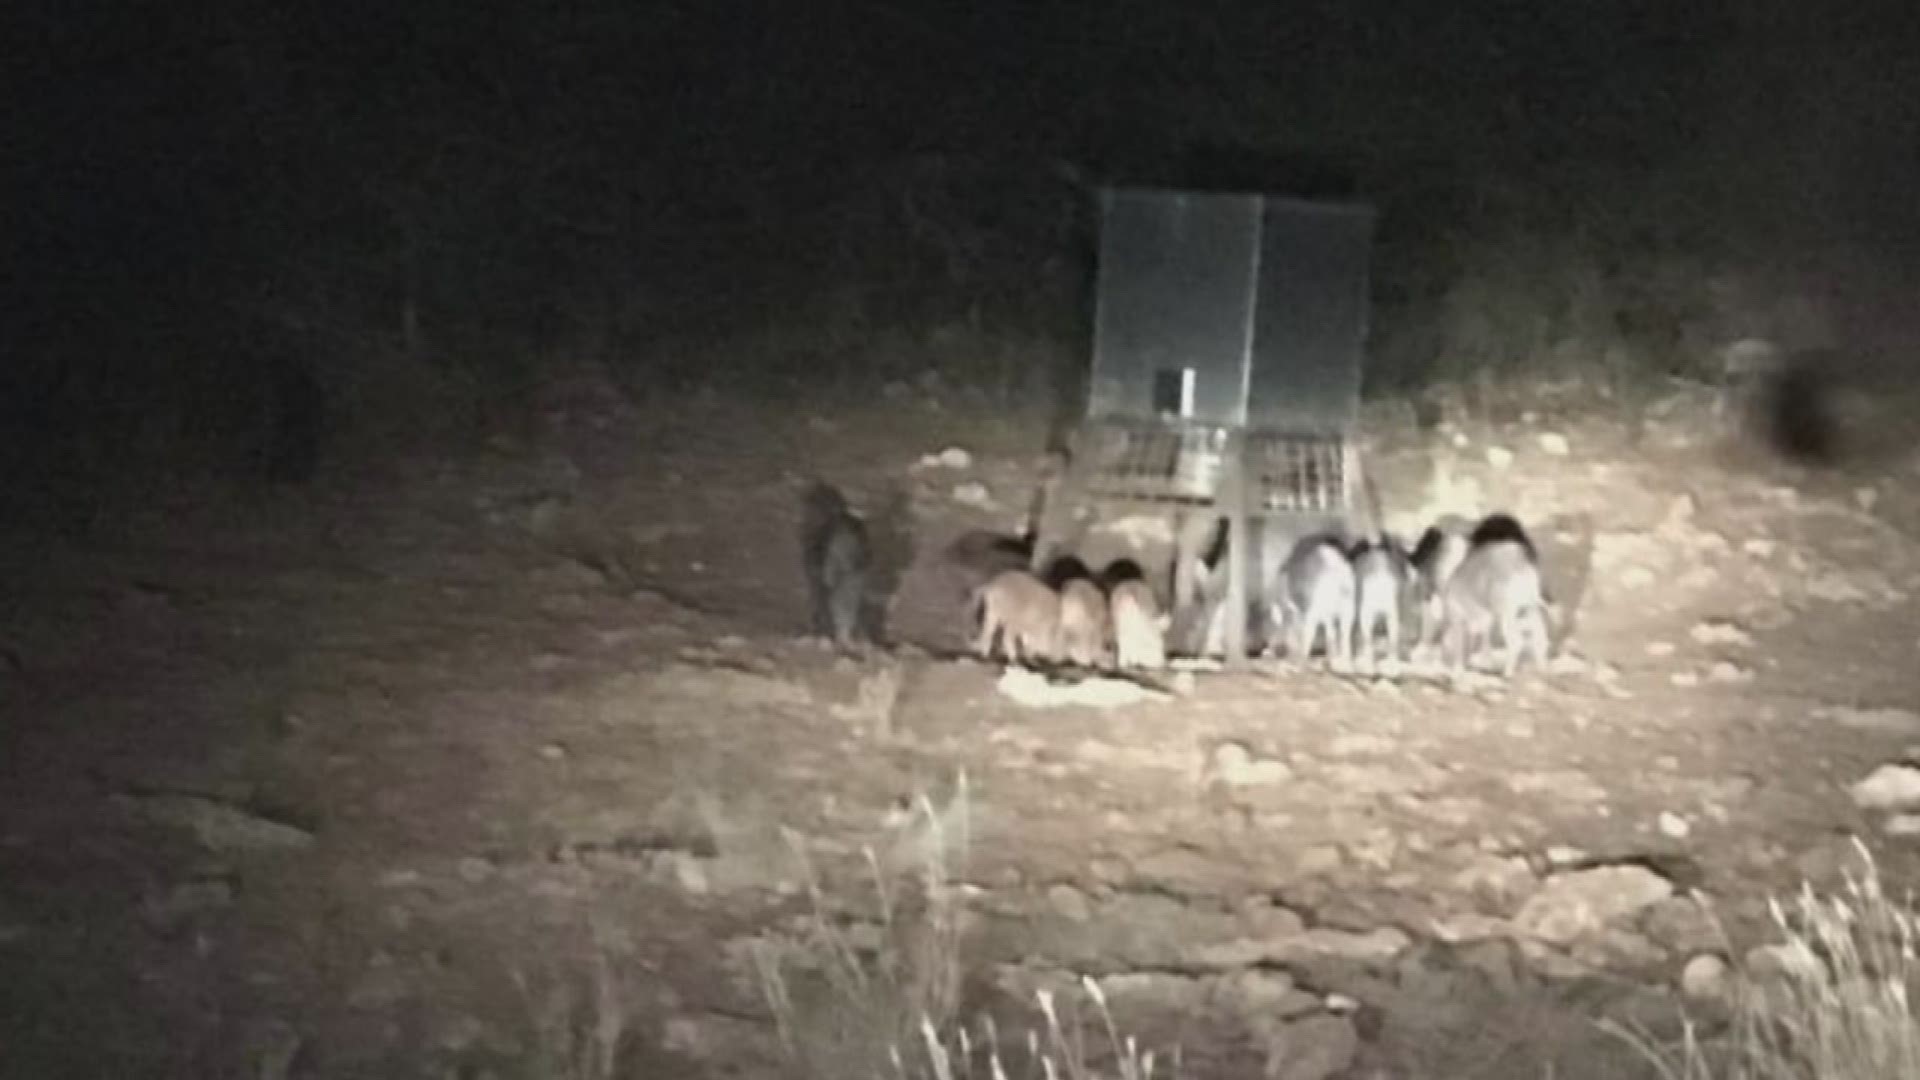 Feral hogs are a big problem in Texas. The USDA estimates they cause about $52M in damage each year. One family in Hays County says the problem is getting worse.